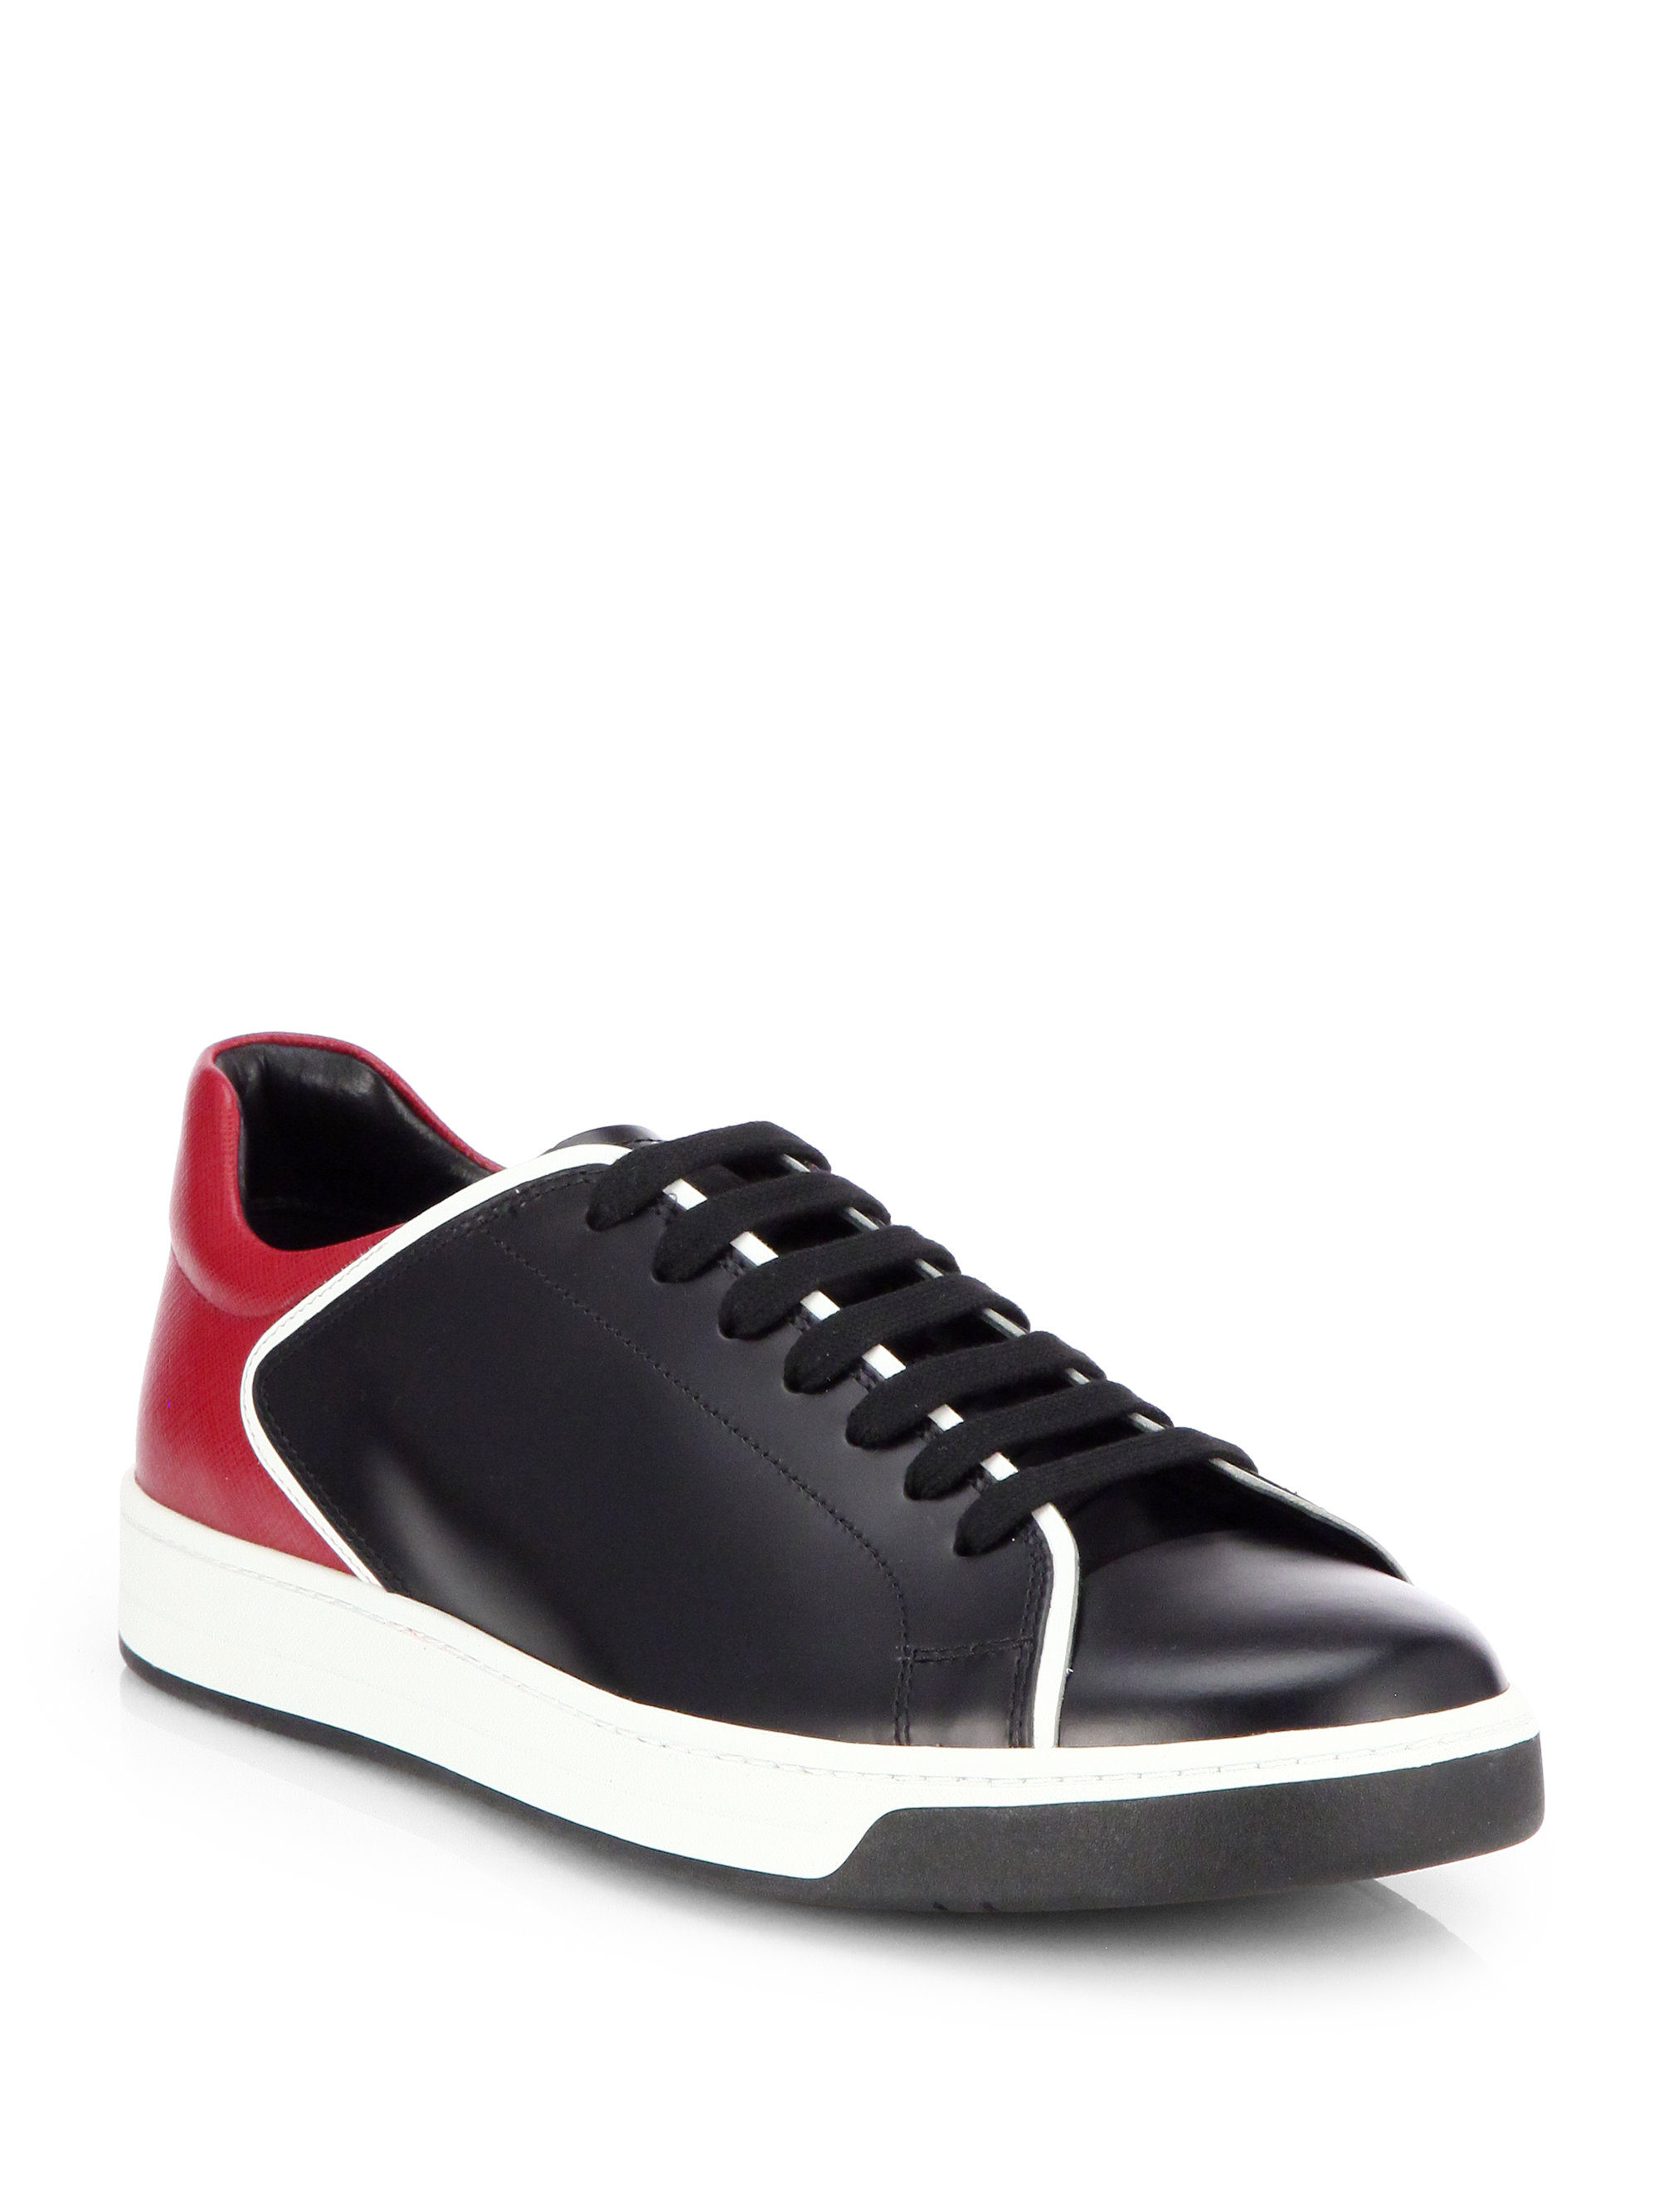 Prada Bicolor Leather Laceup Sneakers in Red for Men (BLACK-RED) | Lyst